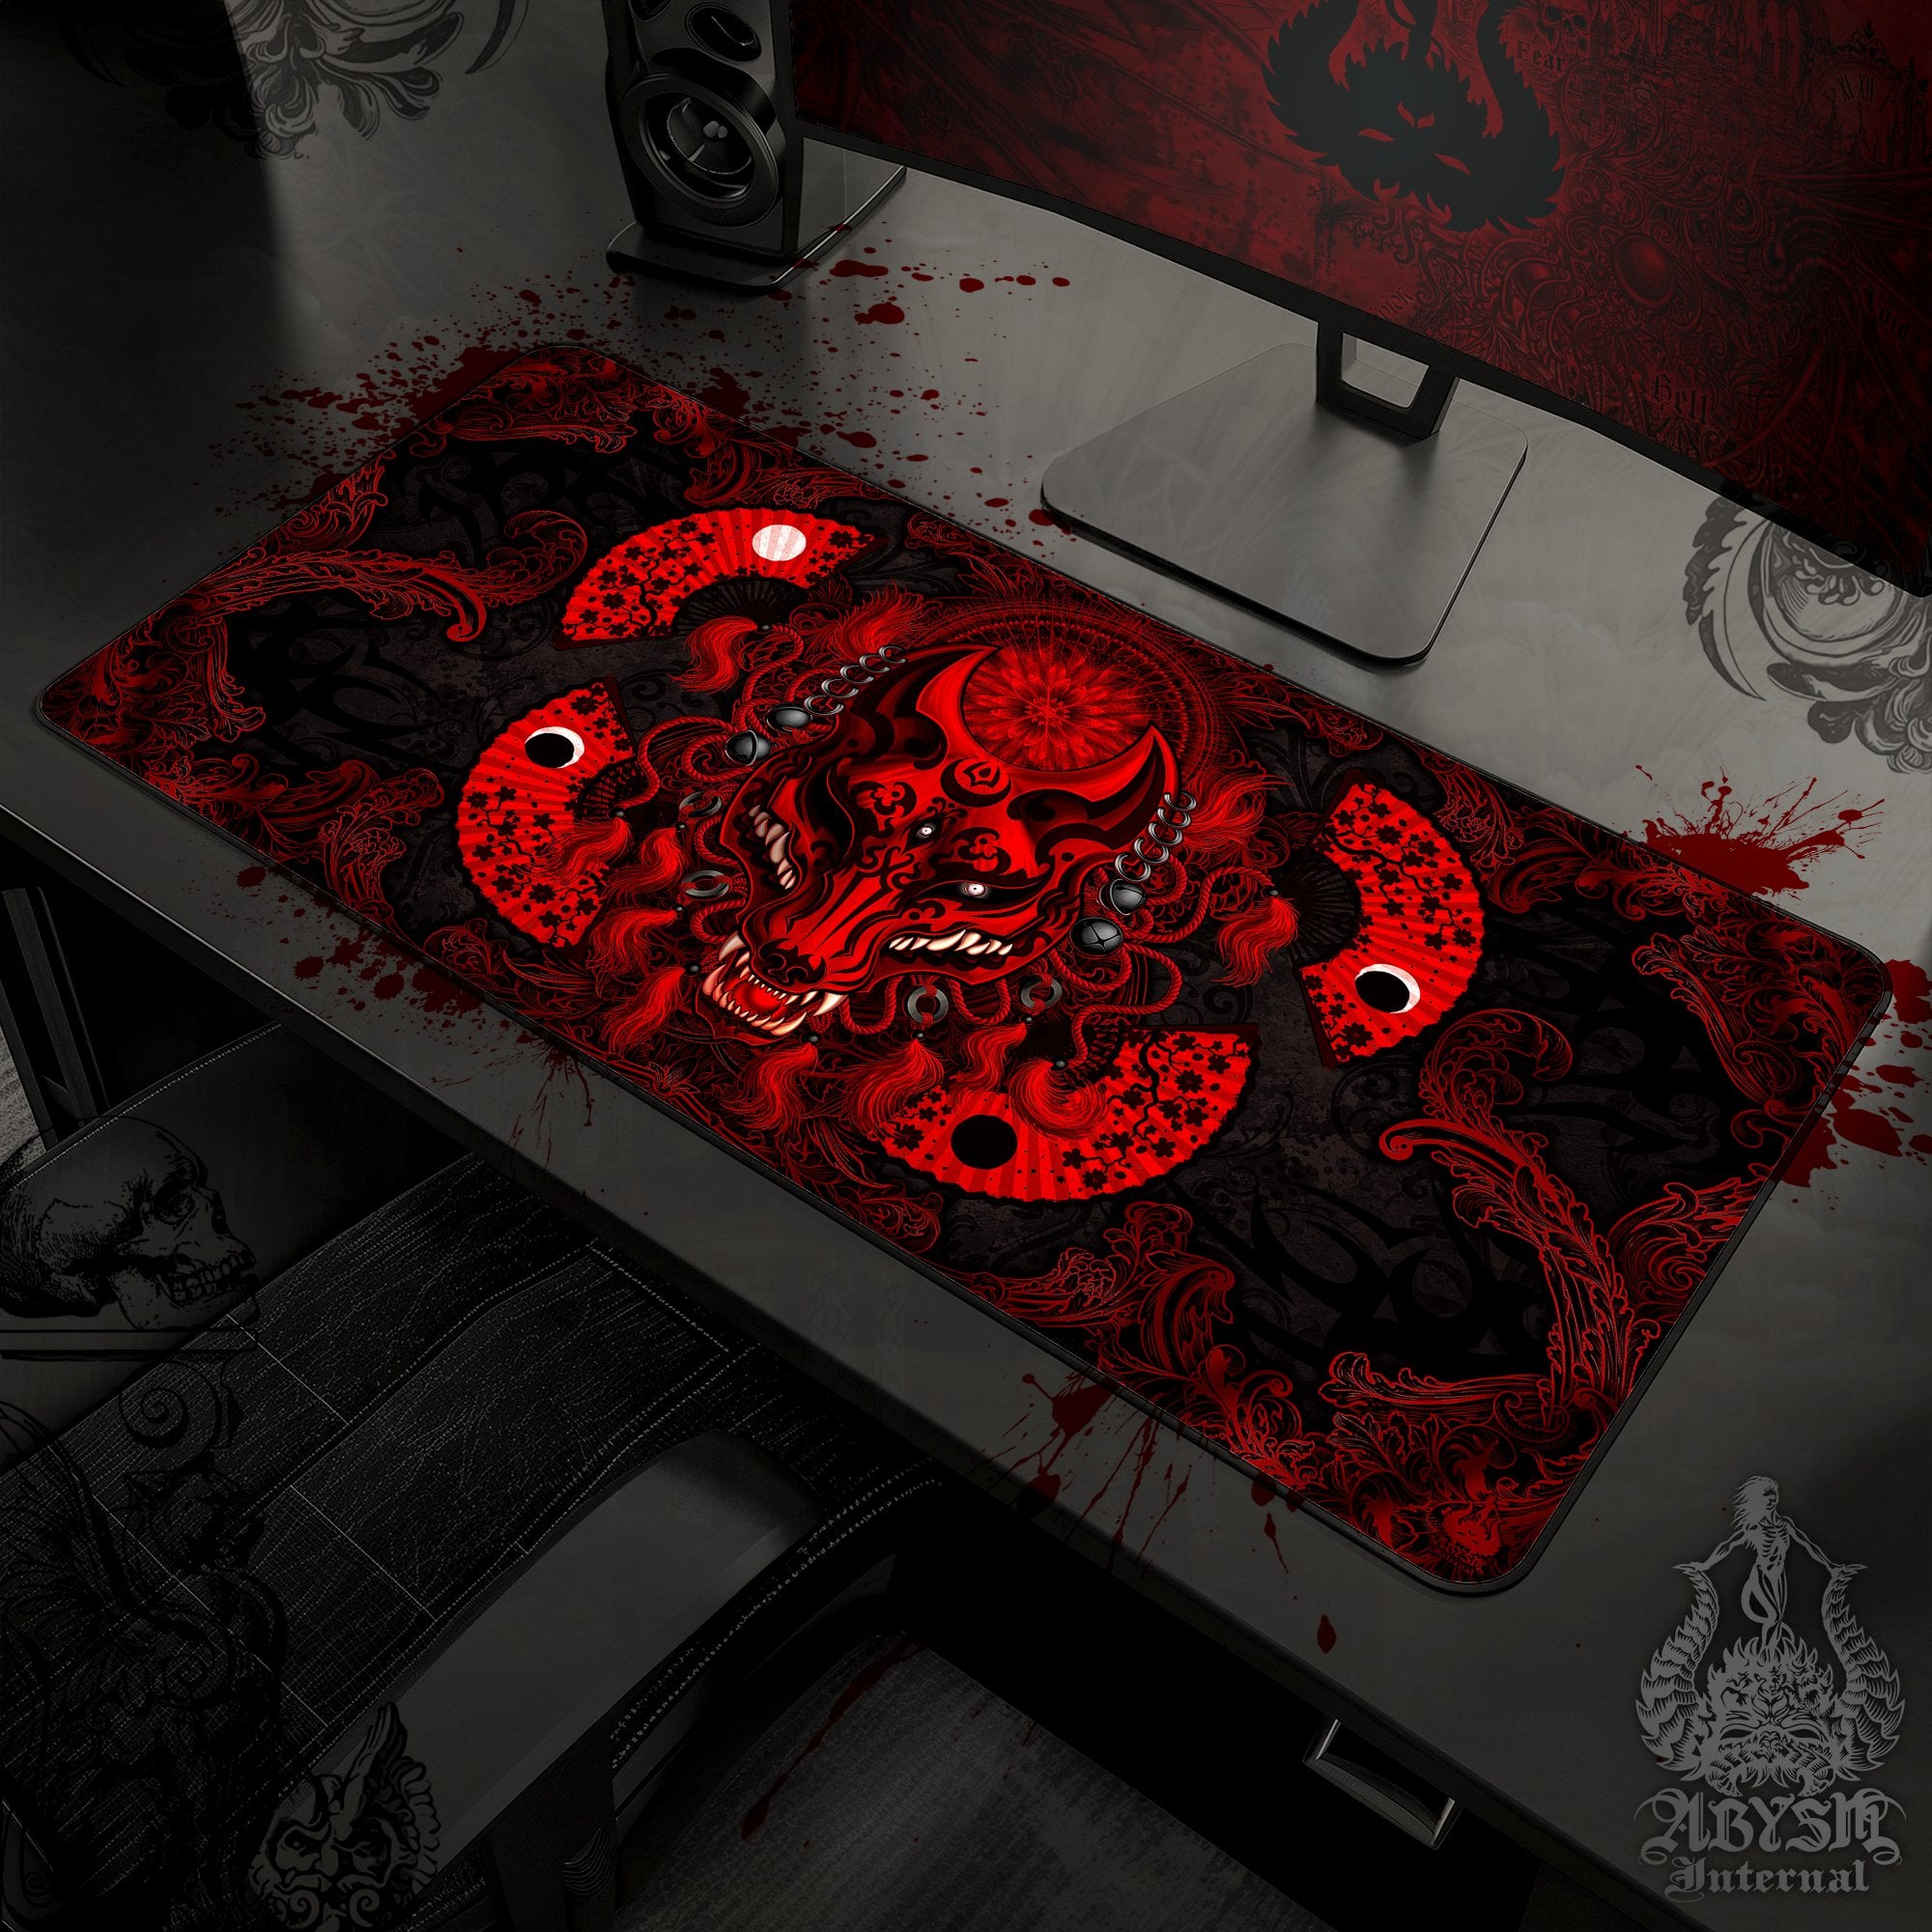 Fox Mask Gaming Mouse Pad, Kitsune Desk Mat, Japanese Wolf Table Protector Cover, Anime Youkai Workpad, Bloody Gothic Manga Okami Art Print - Black Red - Abysm Internal